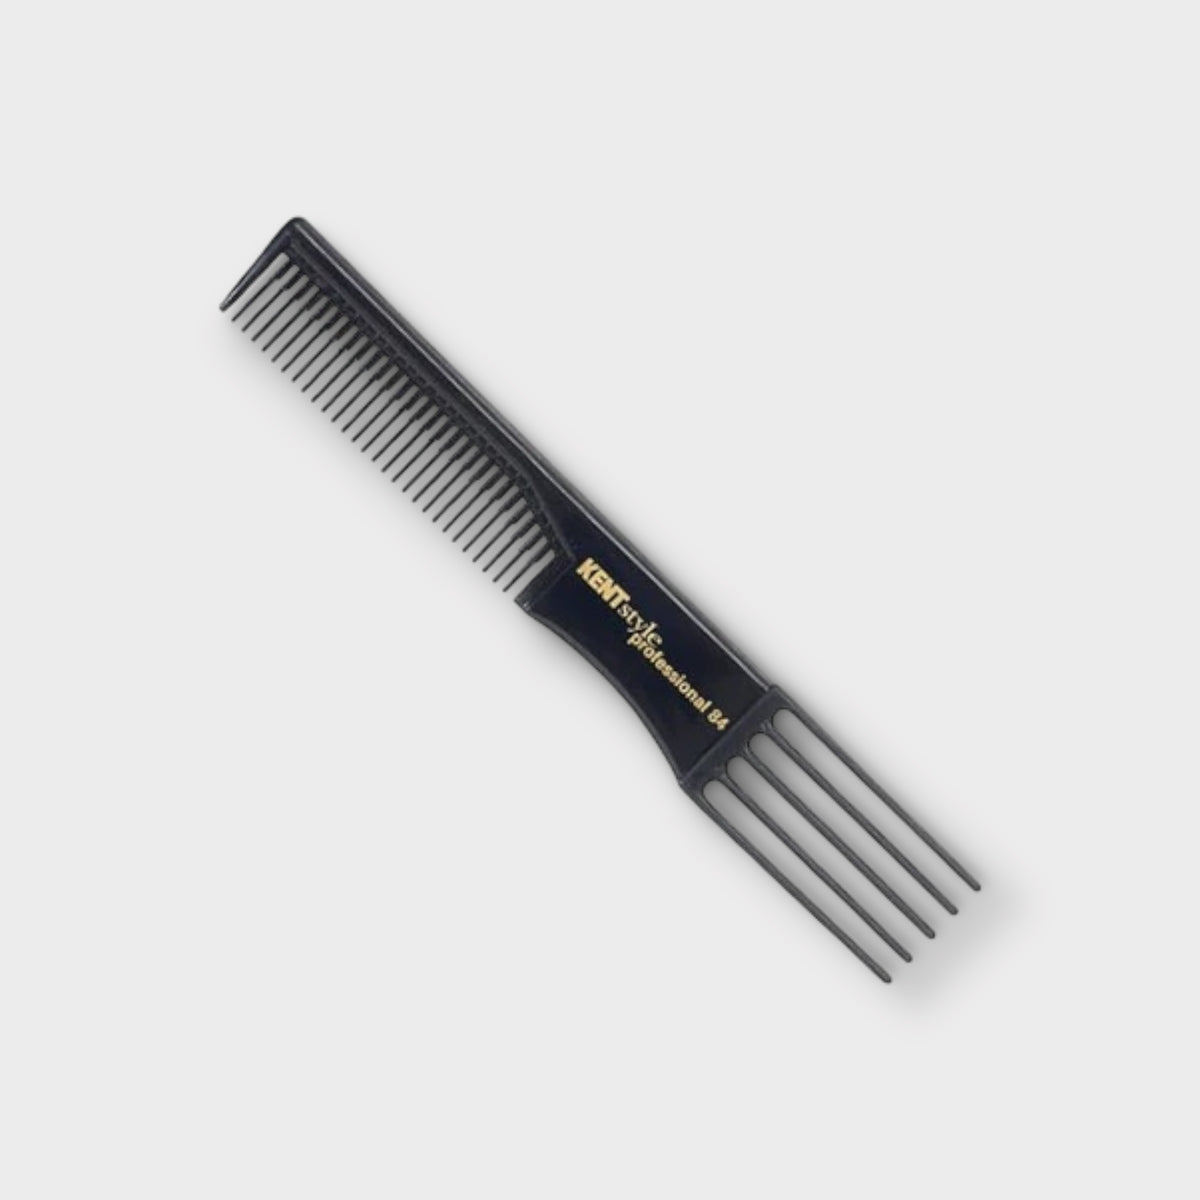 Kent Prong Comb - JLifestyle Store